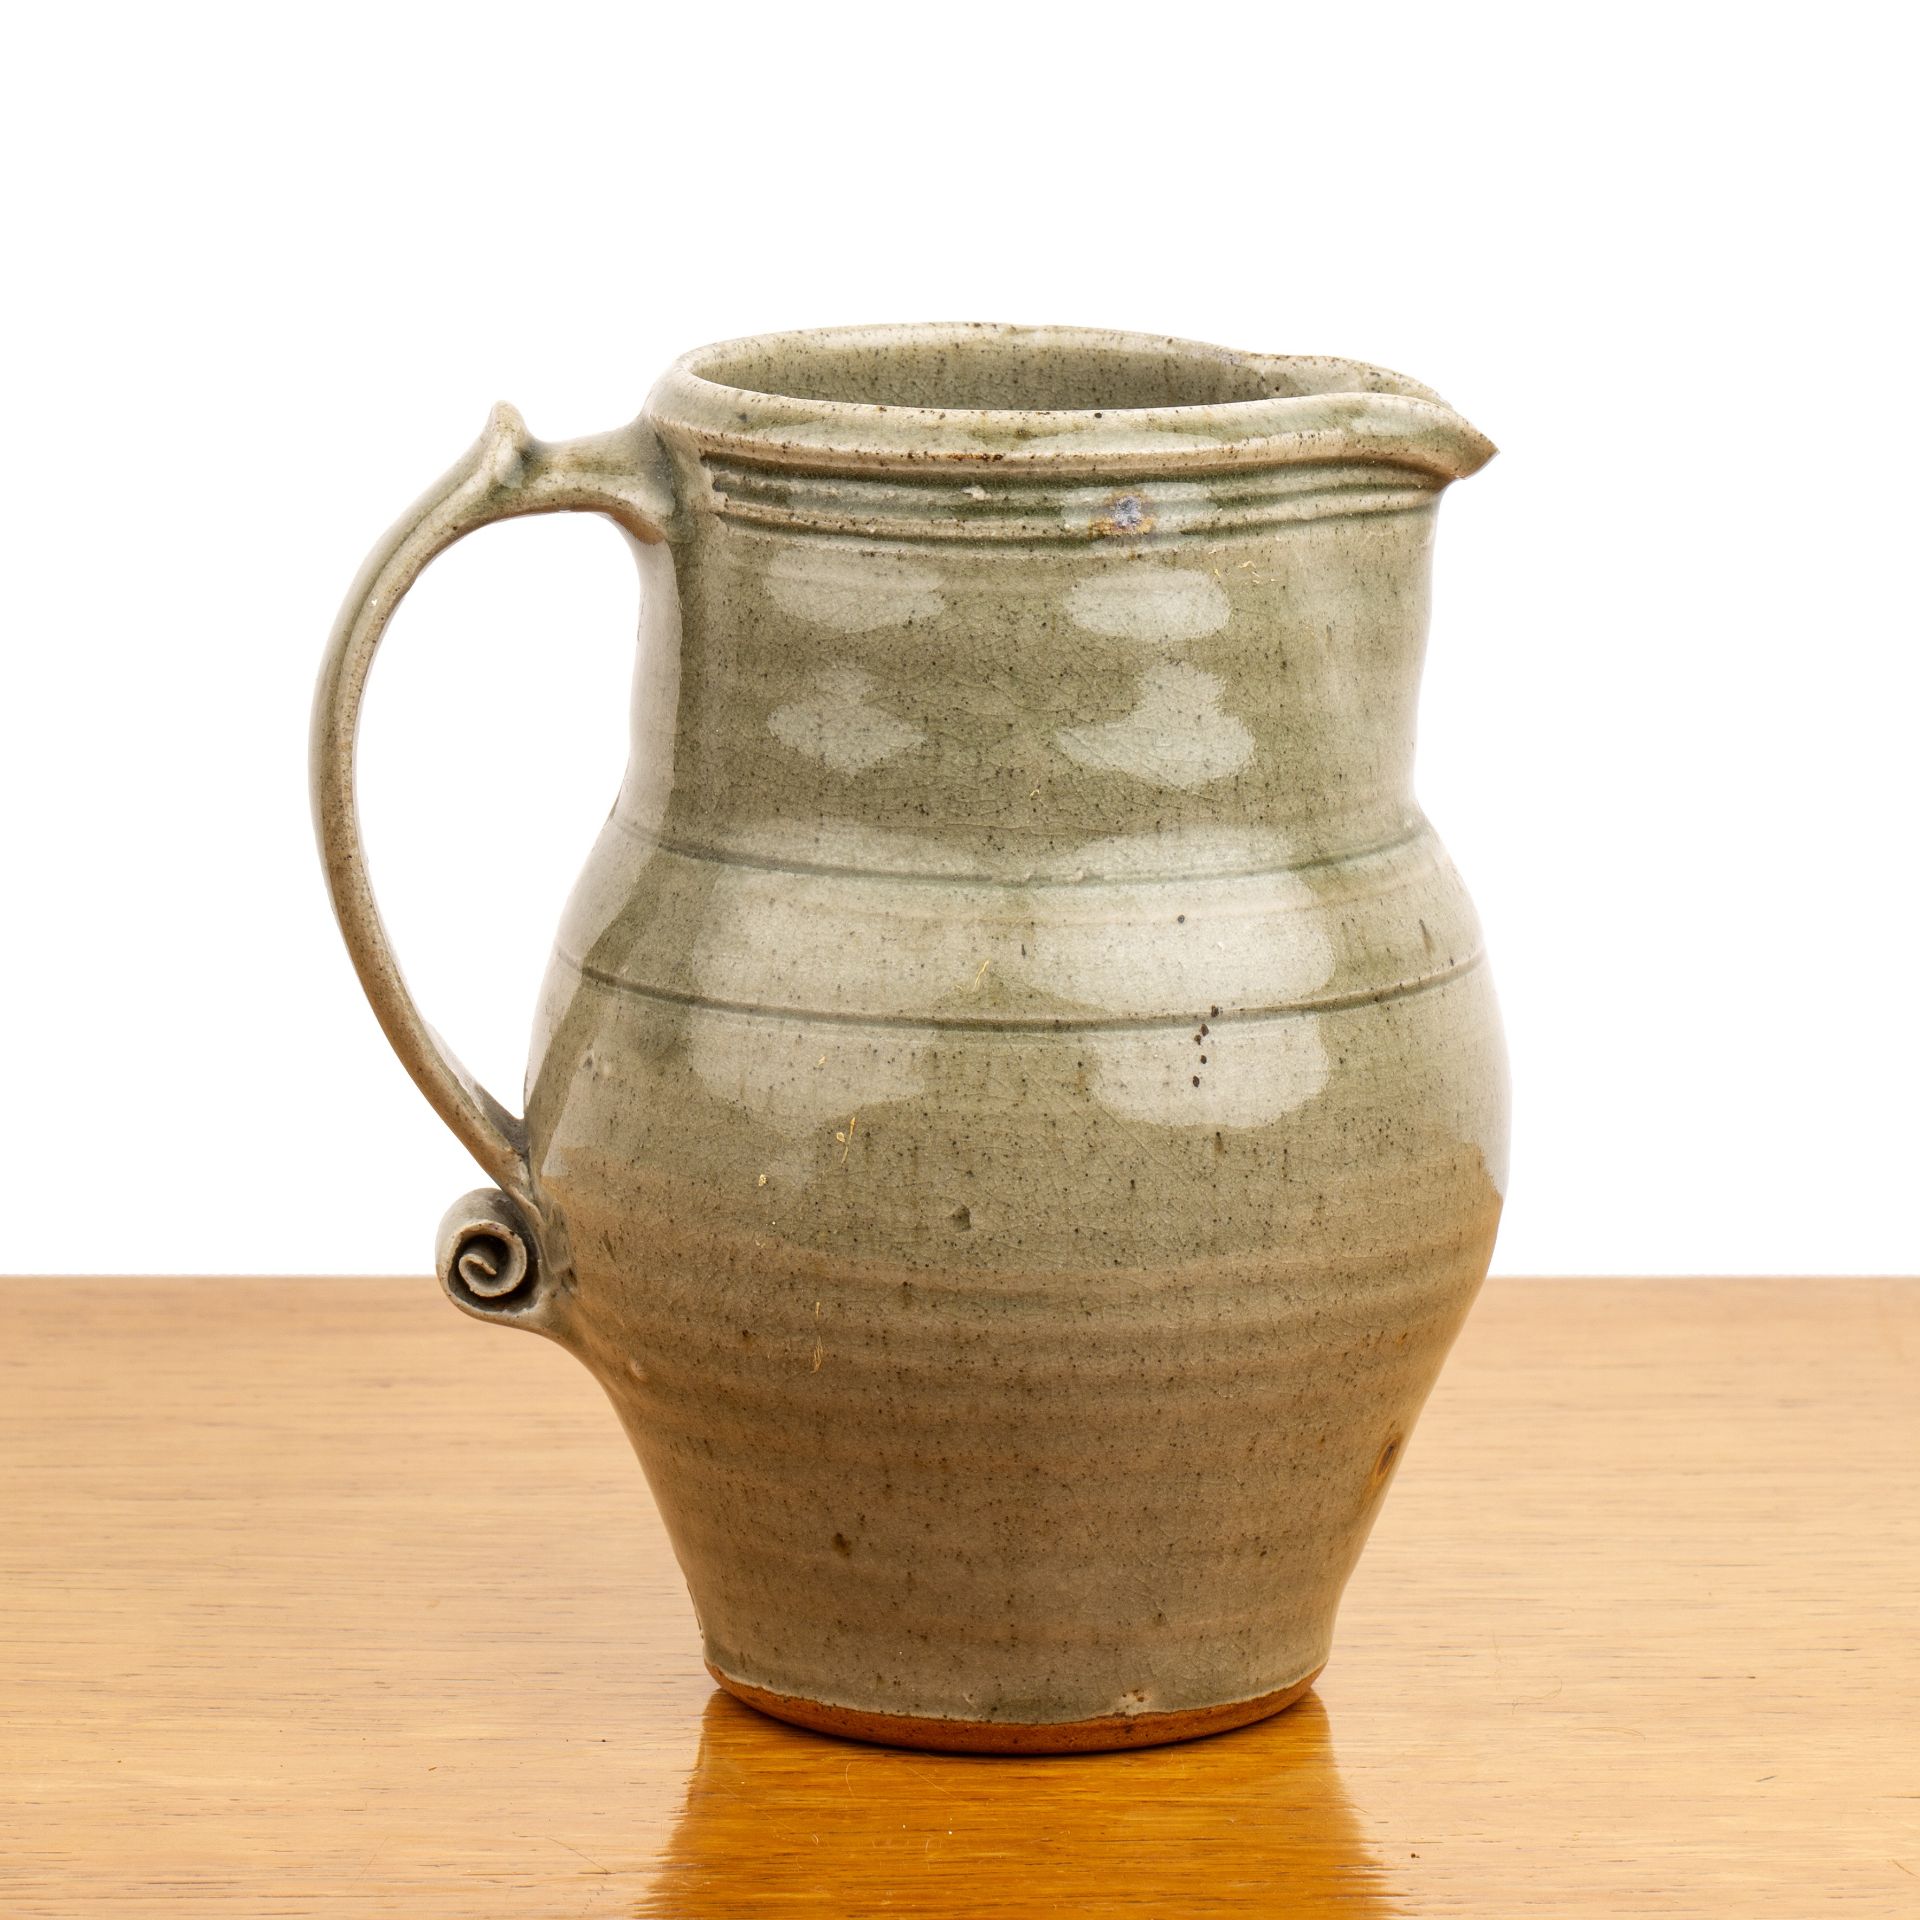 Leach pottery (St. Ives) Standard ware studio pottery jug with scrolling handle and incised banding, - Image 2 of 4